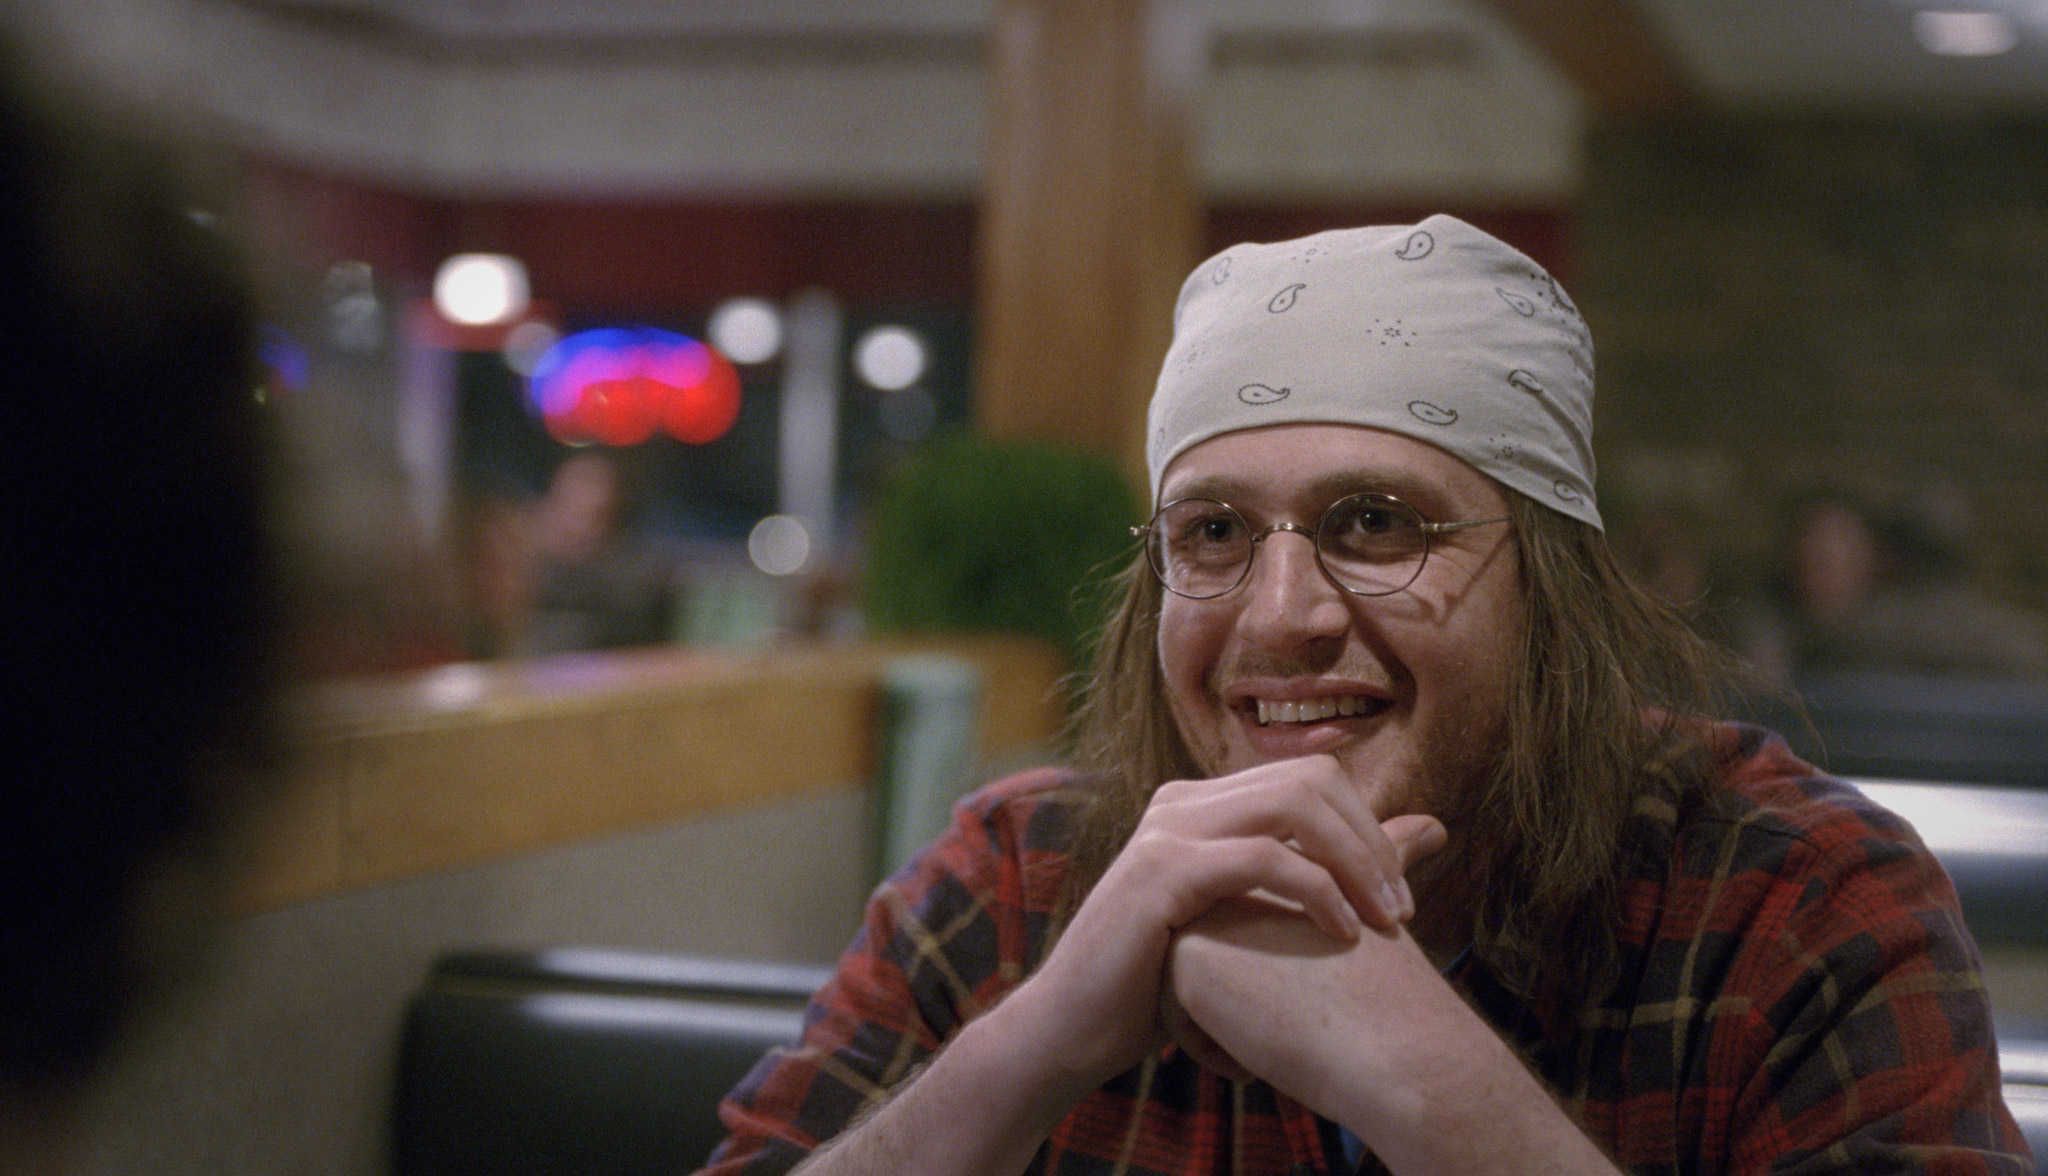 Jason Segel as David Foster Wallace in "The End of the Tour" (Sony Pictures)